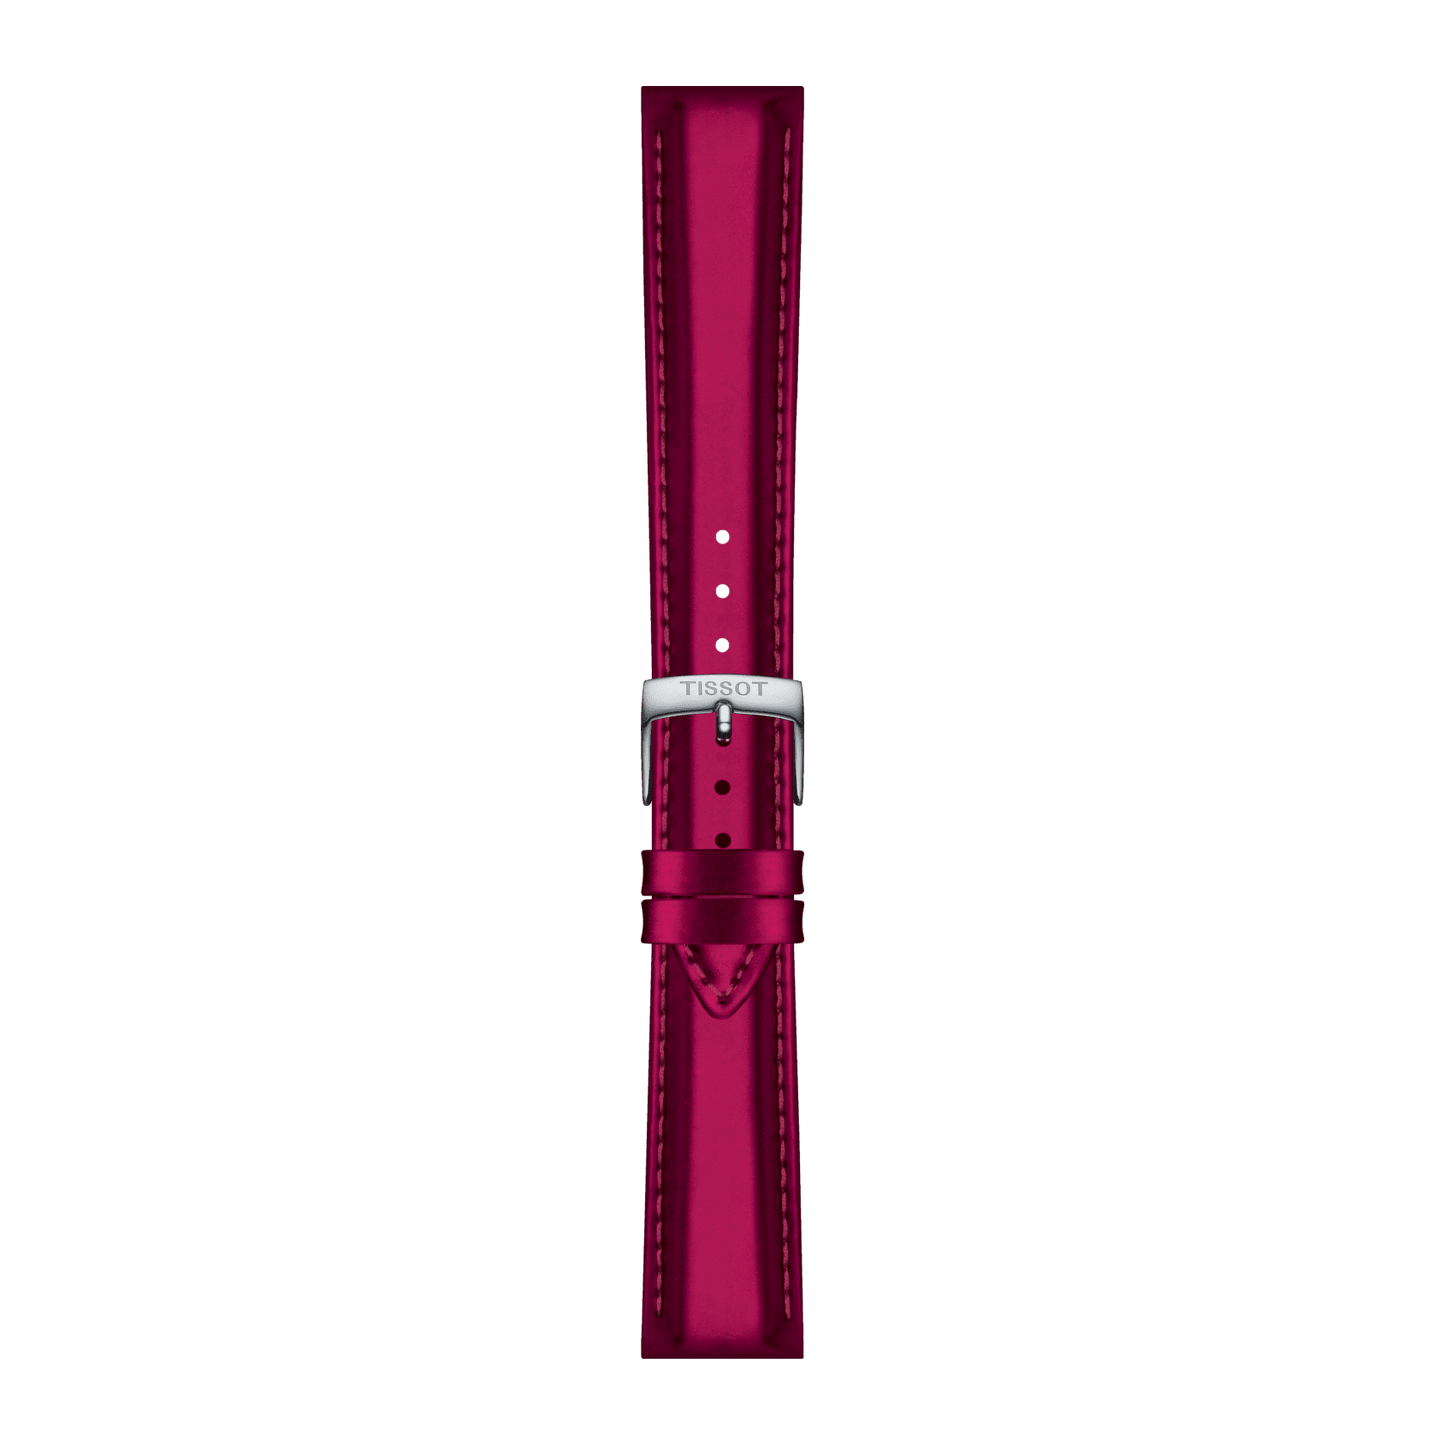 Tissot Official Strap - Lugs 18 mm